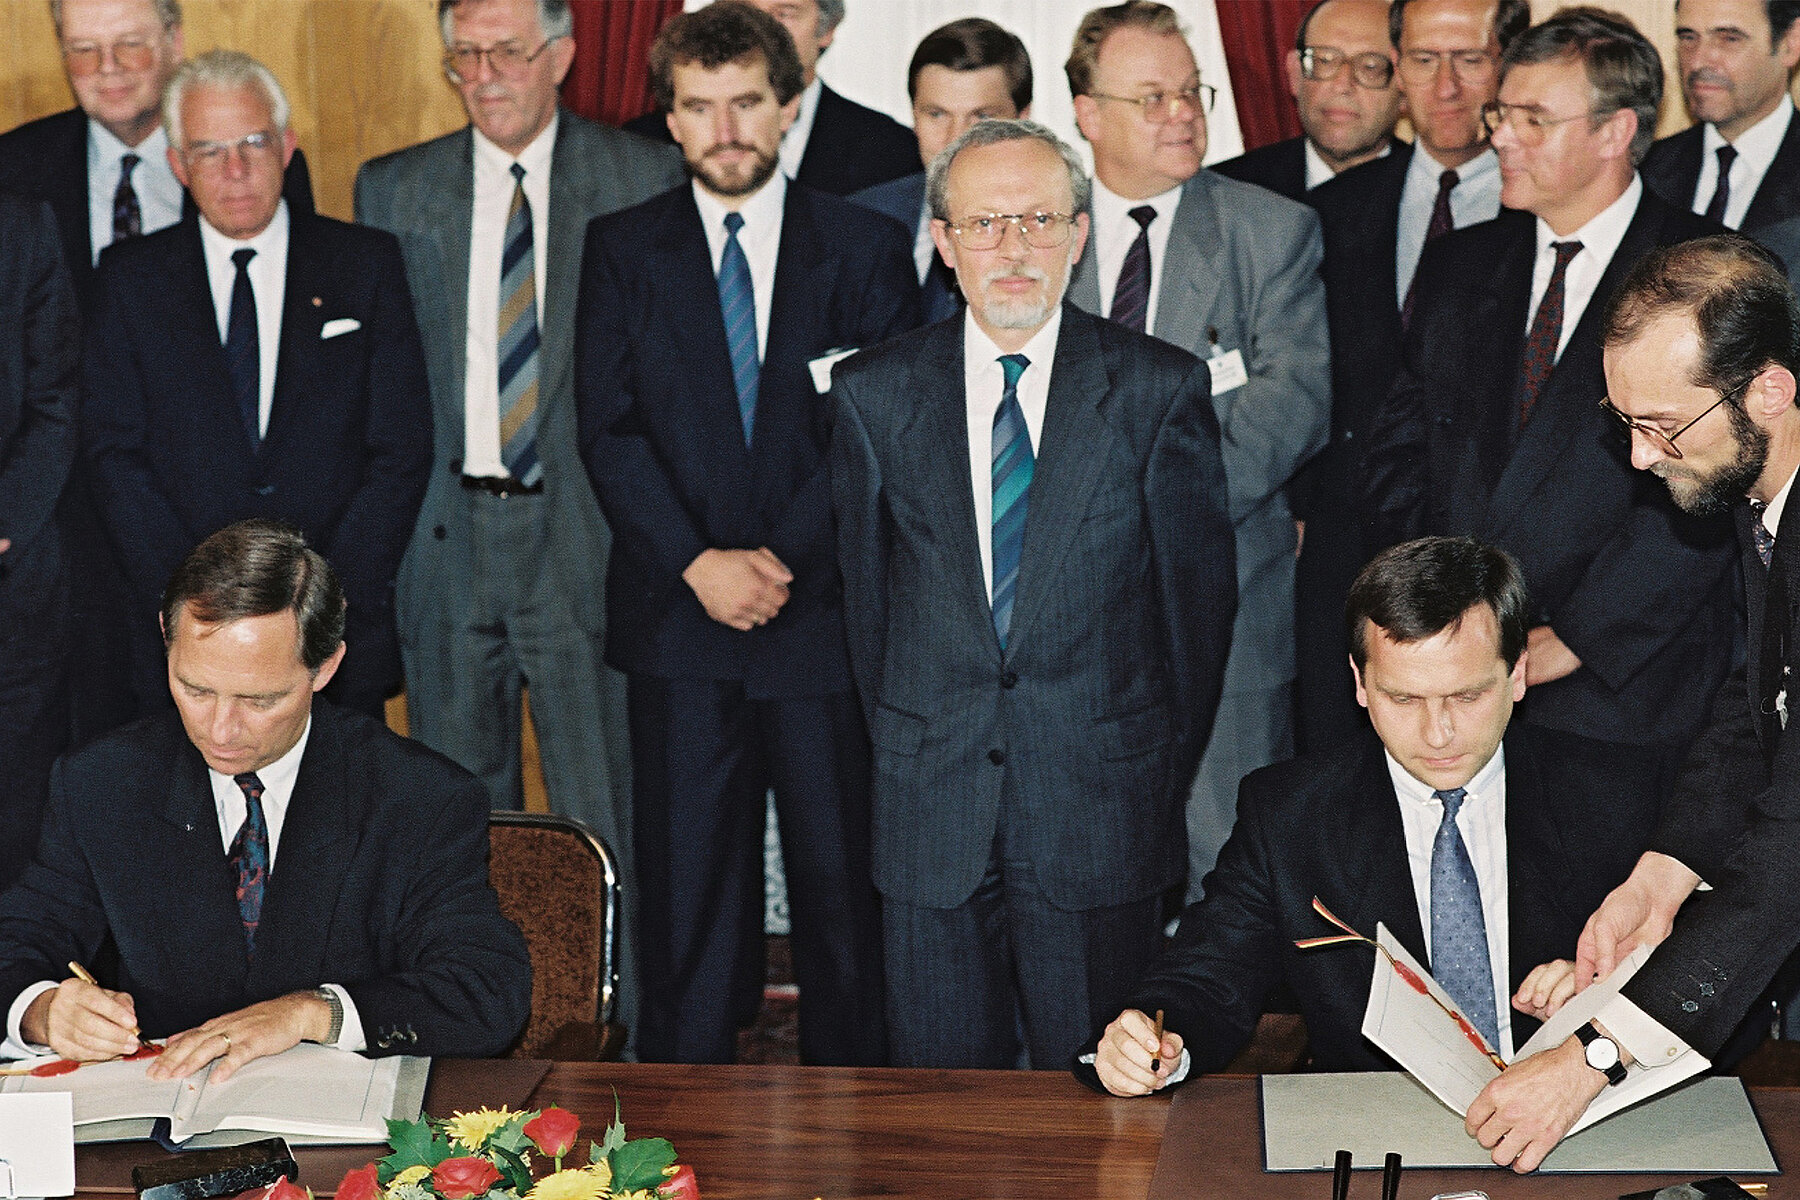 Several men in suits stand in a row. In the foreground, two men sit at a table, each signing a document.  